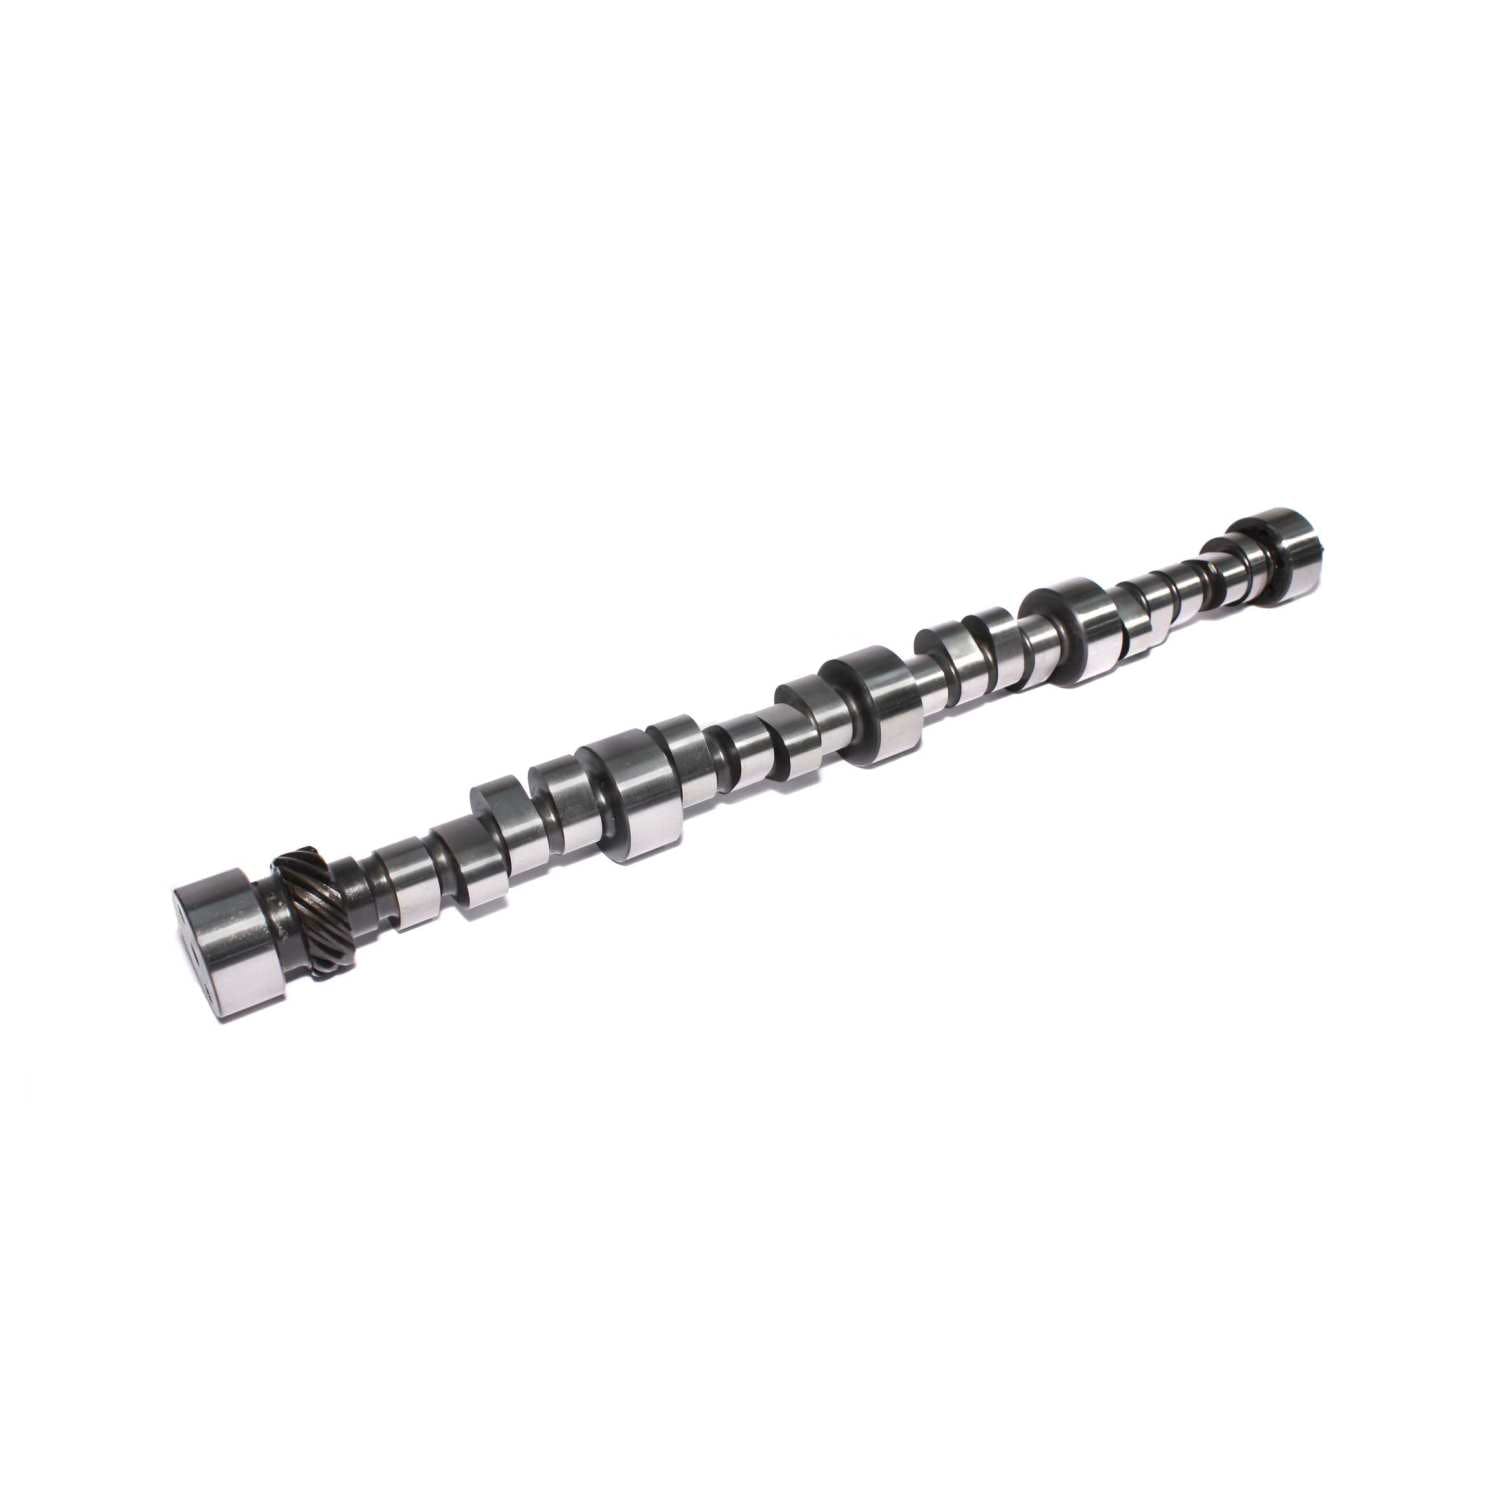 Competition Cams 11-724-9 Drag Race Camshaft